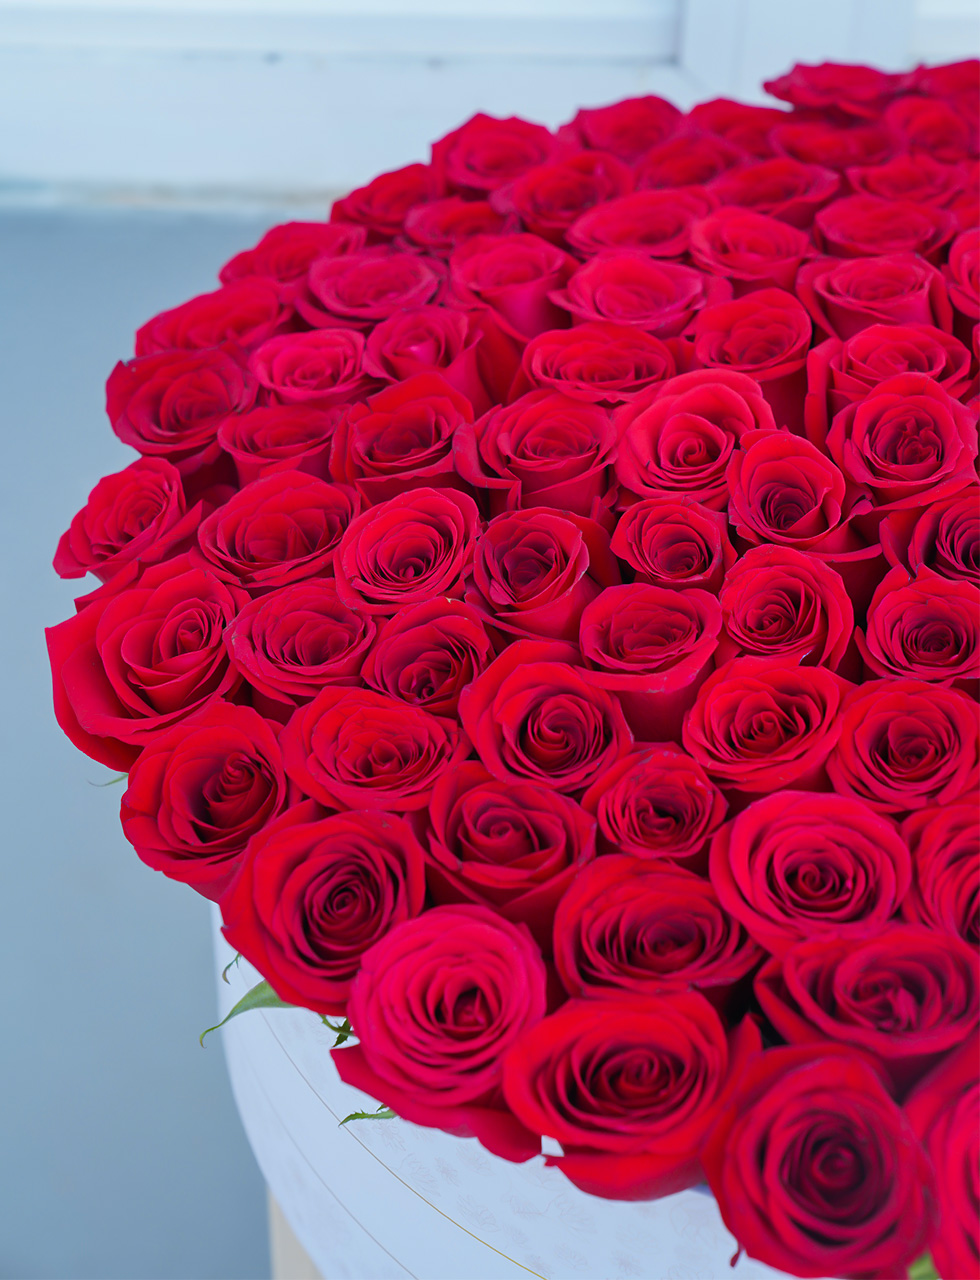 Red Roses Arrangement as Valentine's Day Gift in Dubai